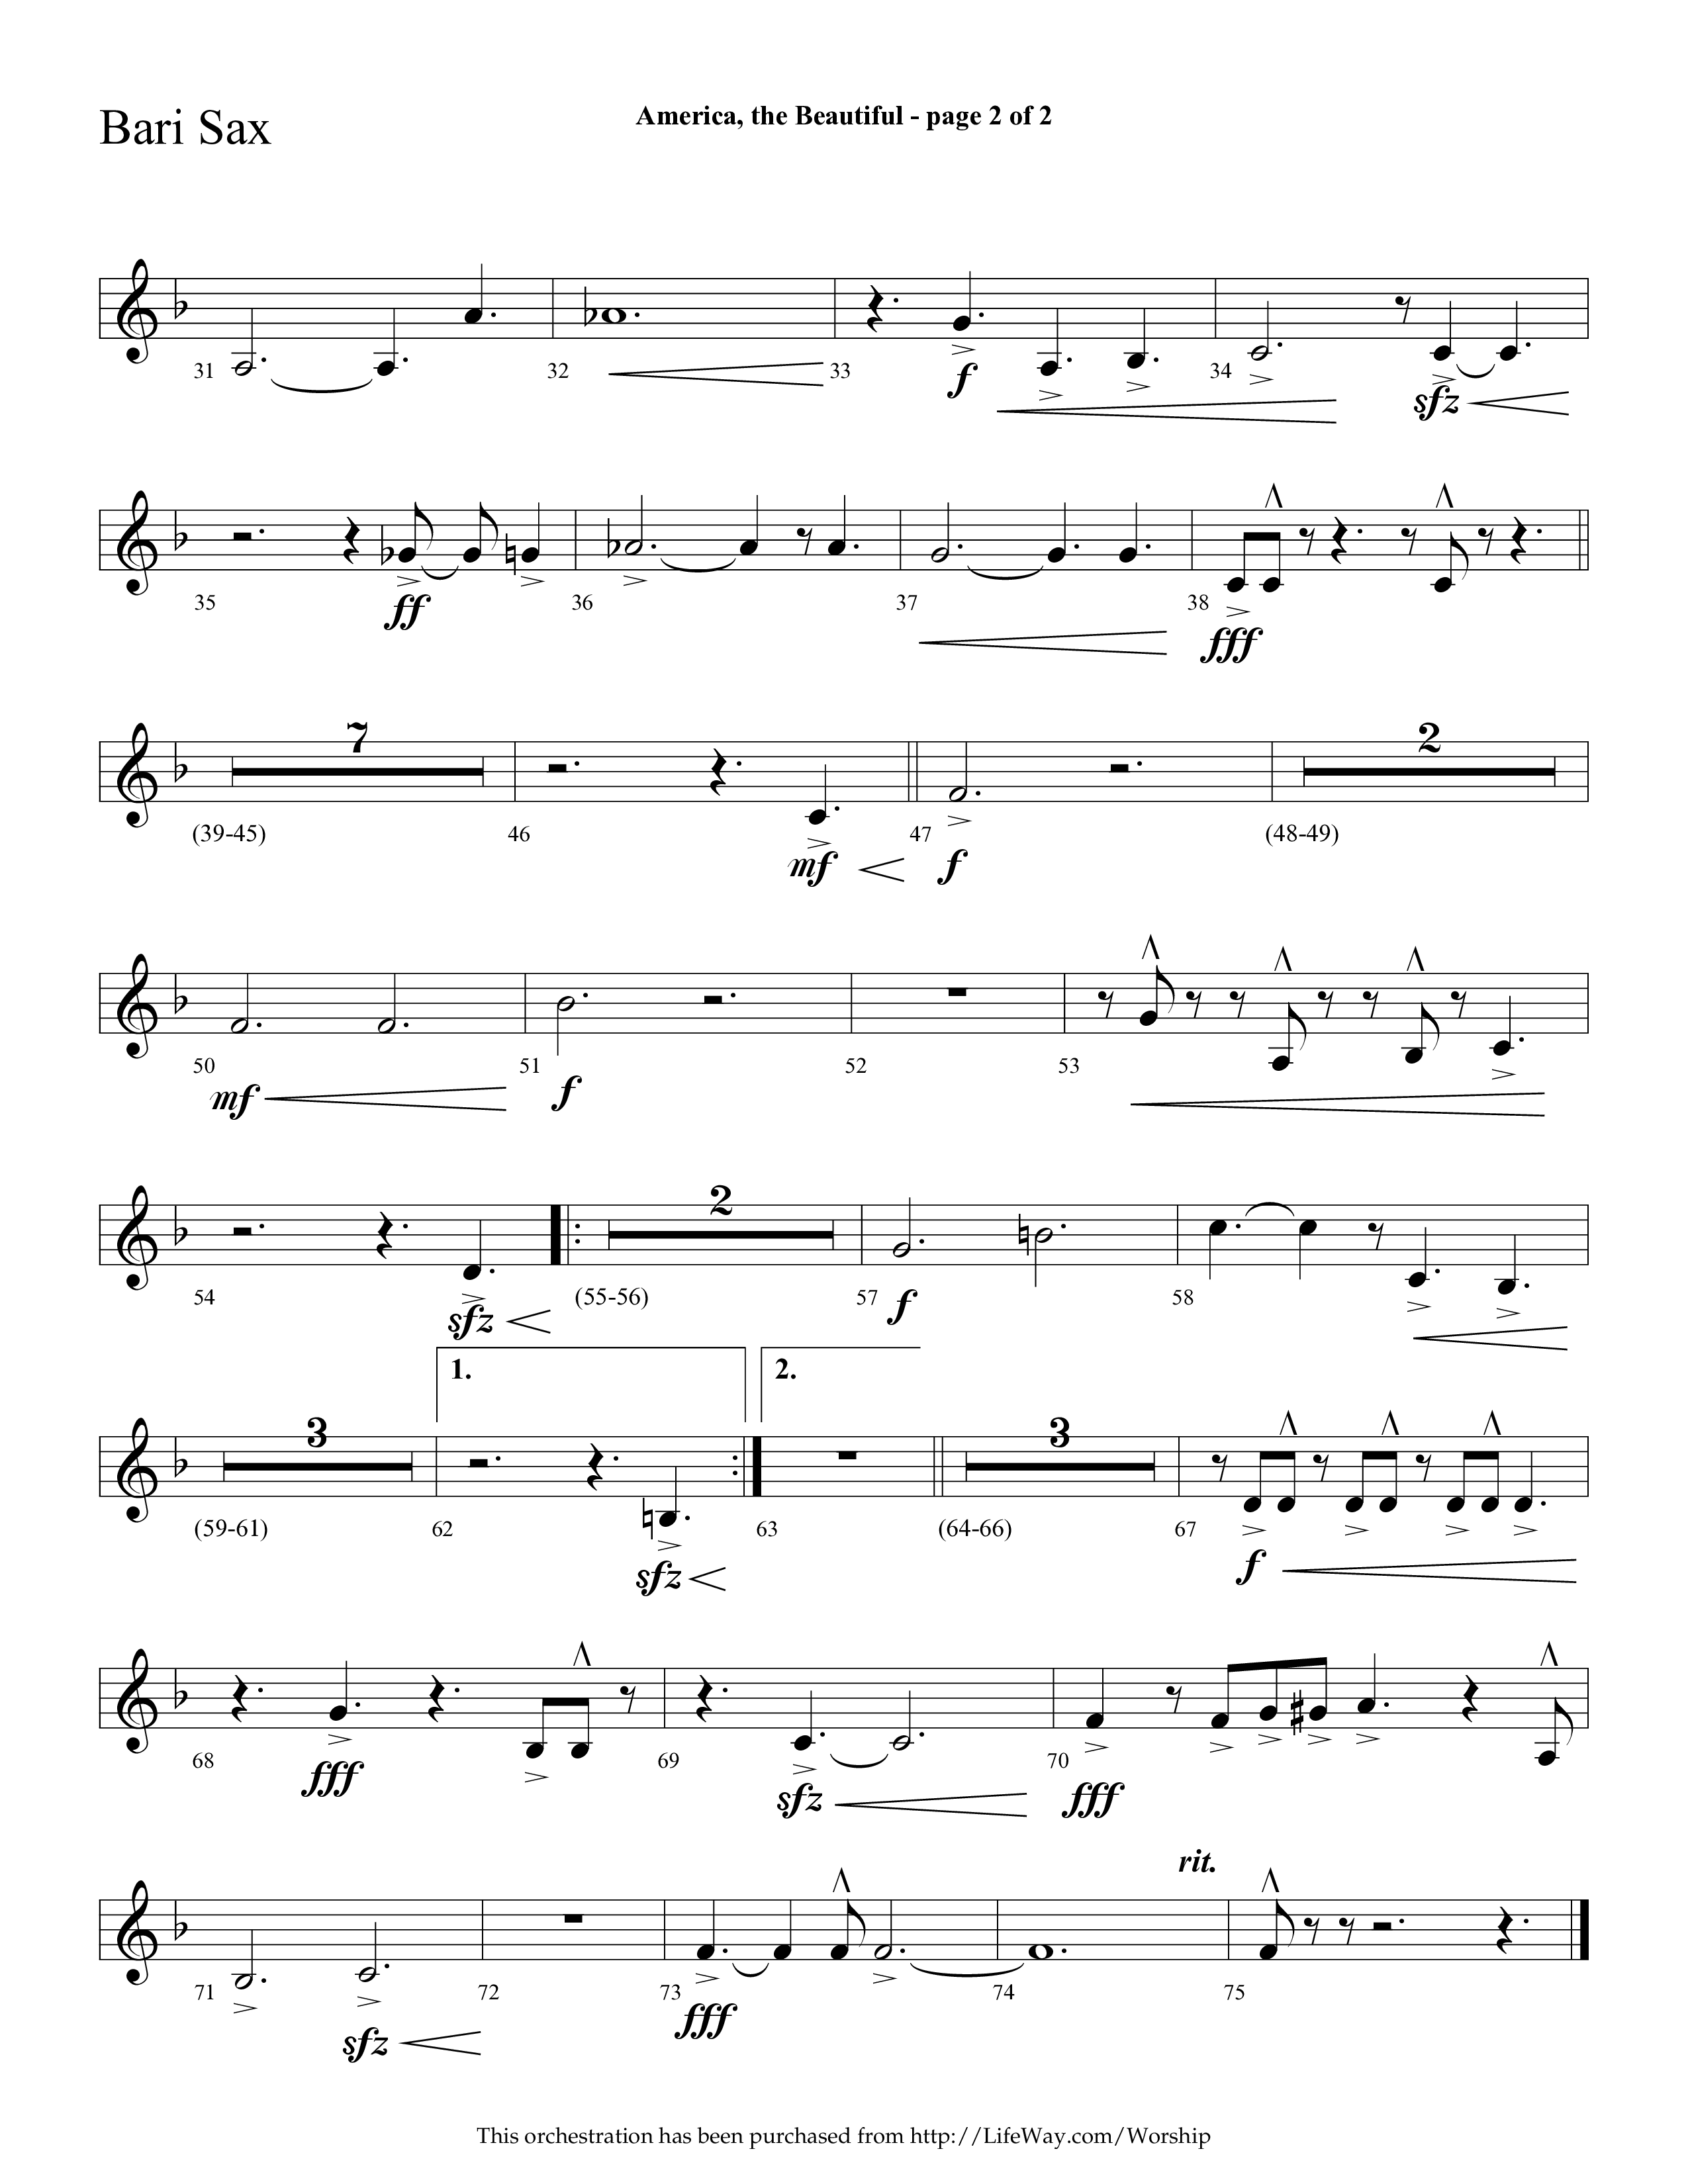 America The Beautiful (with Freedoms Song) (Choral Anthem SATB) Bari Sax (Lifeway Choral / Arr. Cliff Duren)